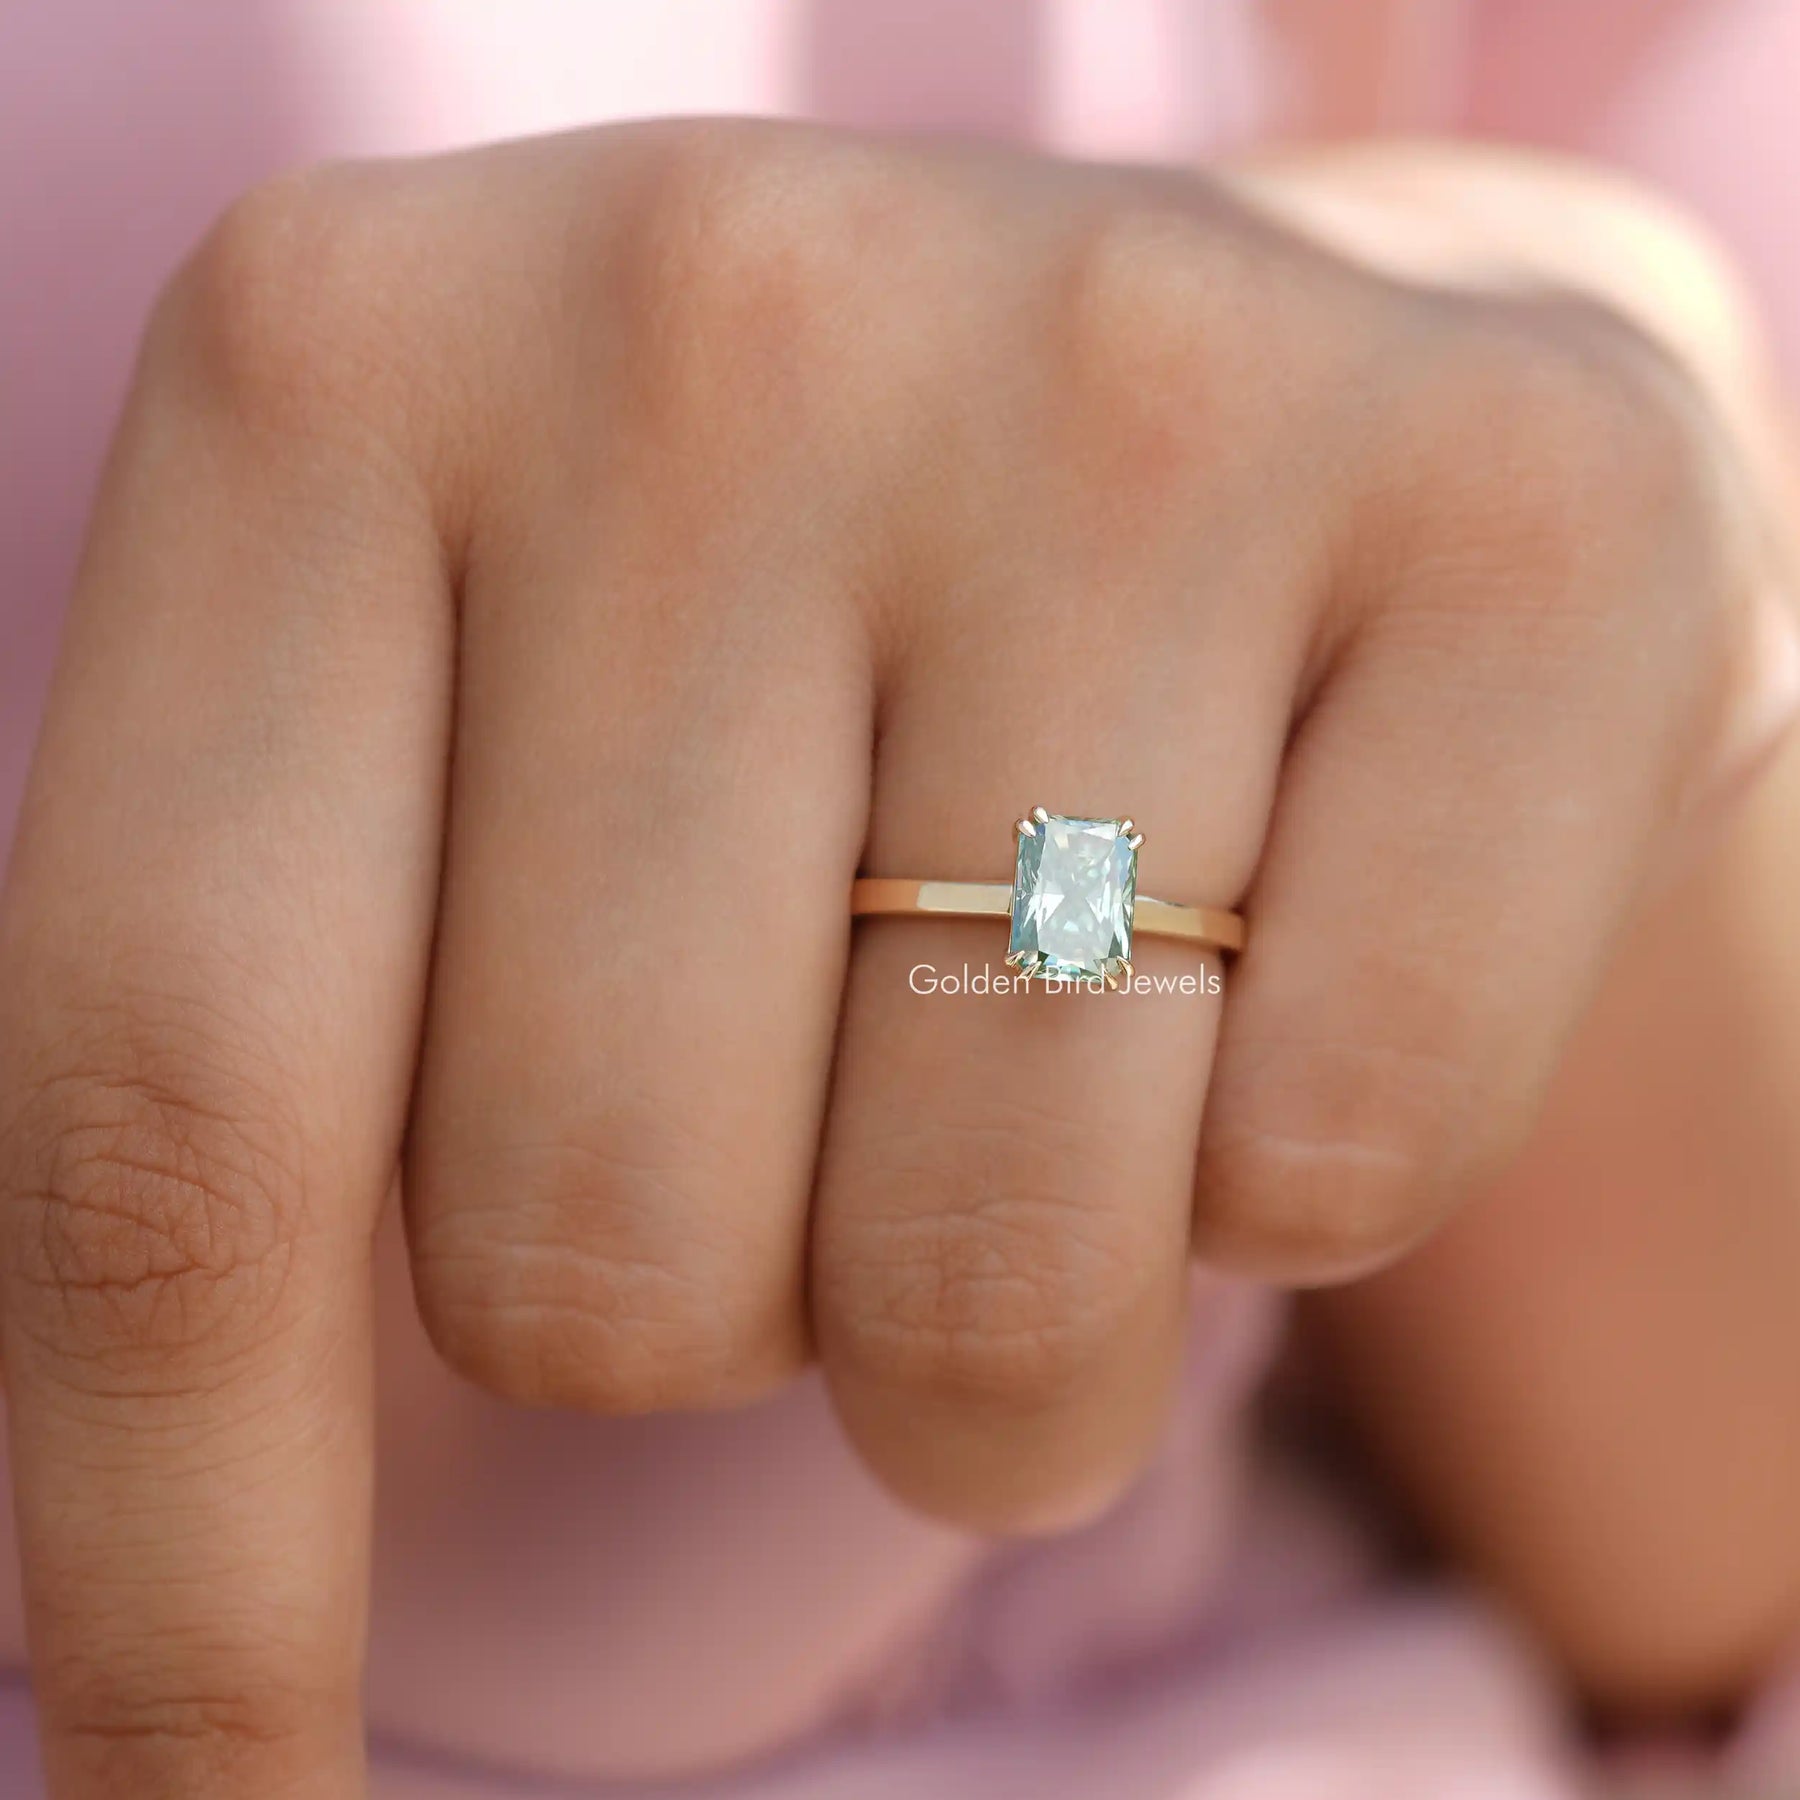 [In Finger Front View Of Solitaire Moissanite Engagement Ring]-[Golden Bird Jewels]